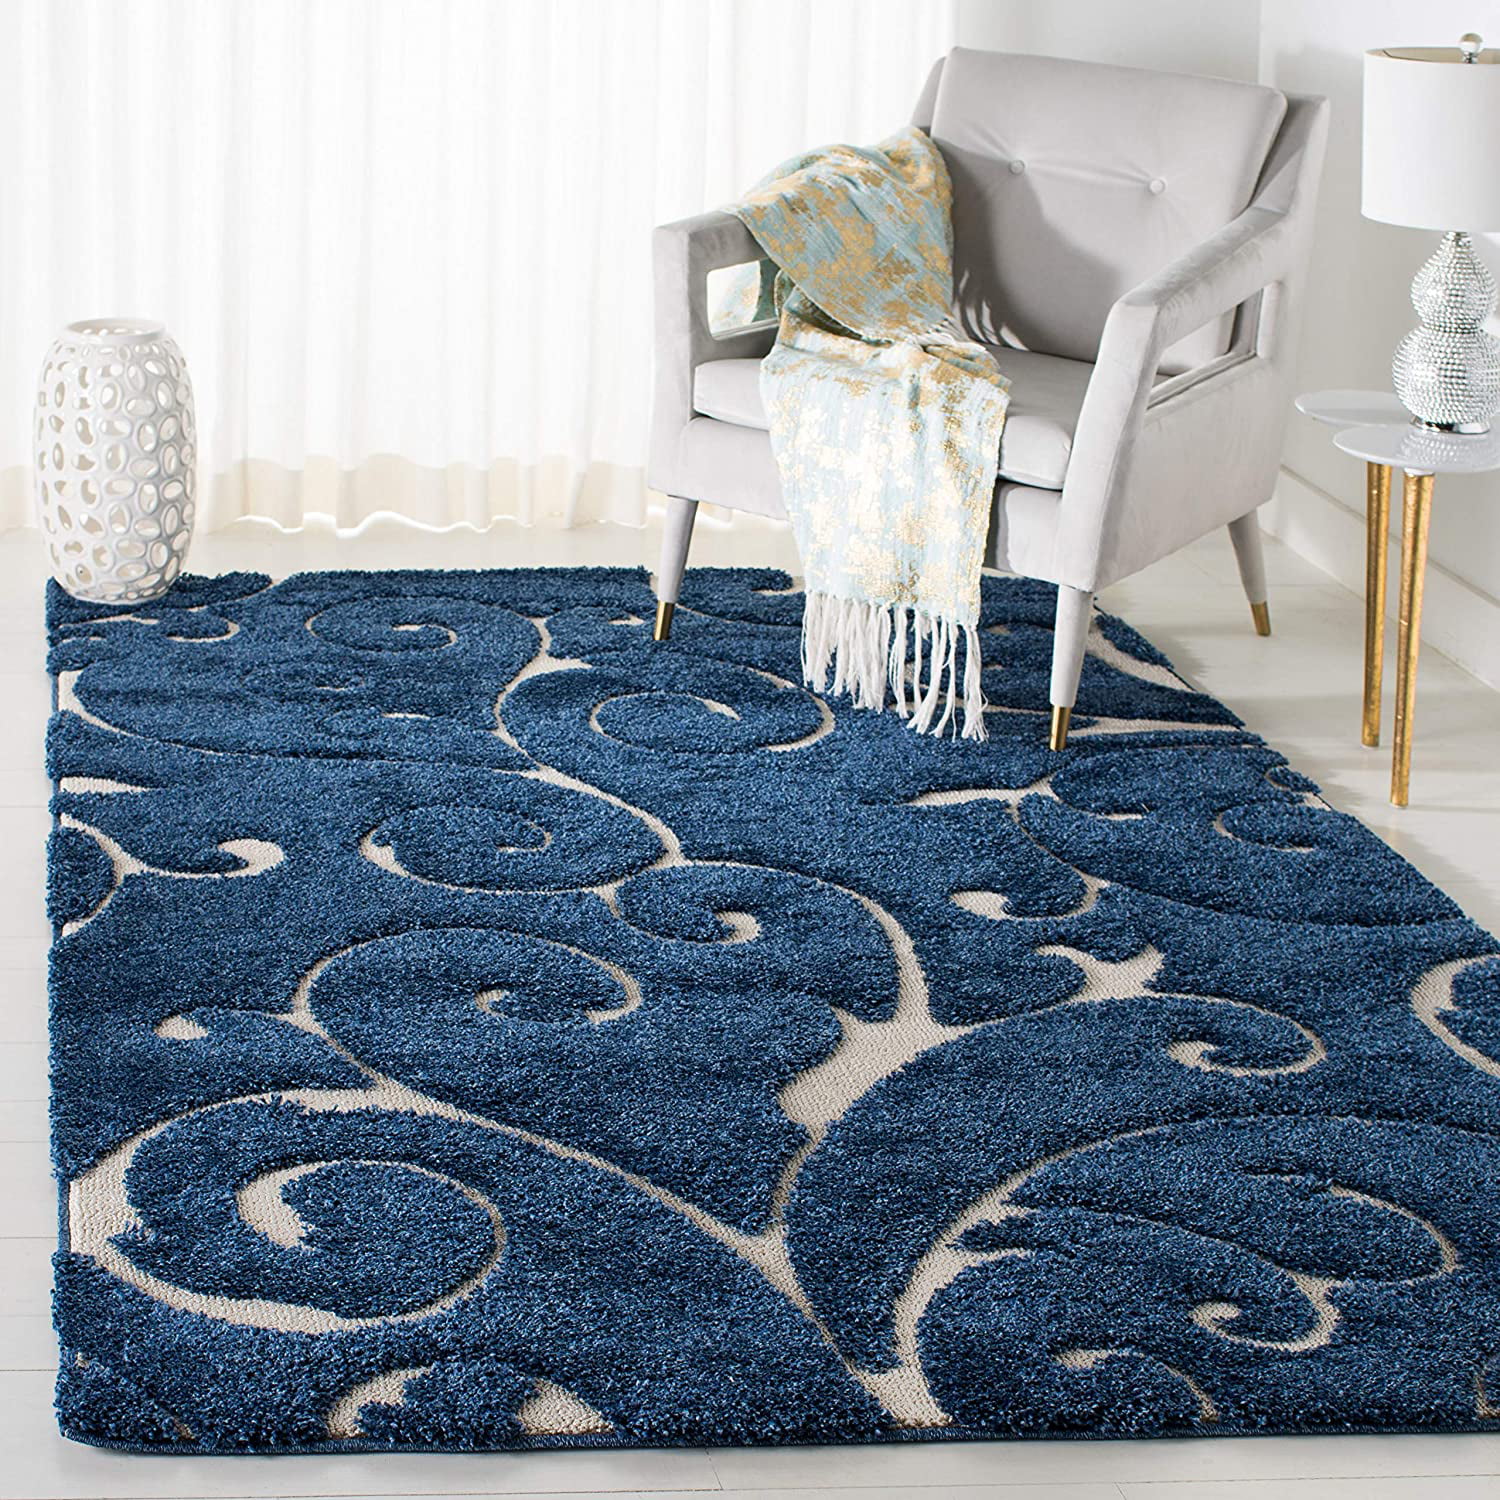 Beige/Blue Grey 4' x 6' SAFAVIEH Florida Shag Collection SG455 Scrolling Vine Graceful Swirl Textured Non-Shedding Living Room Bedroom Dining Room Entryway Plush 1.2-inch Thick Area Rug 